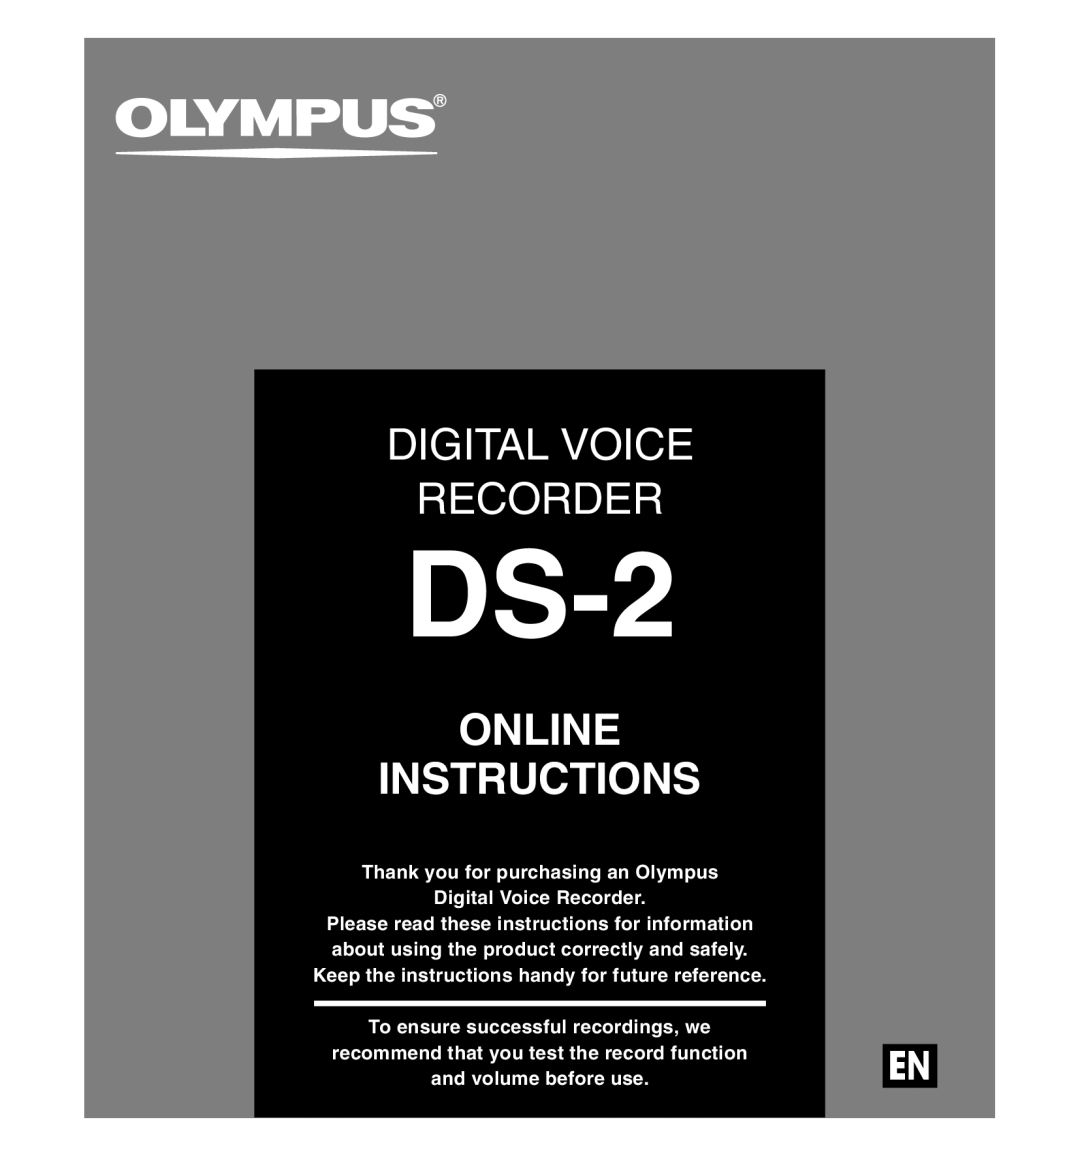 Olympus manual DS-2, Digital Voice Recorder, Online Instructions, Keep the instructions handy for future reference 